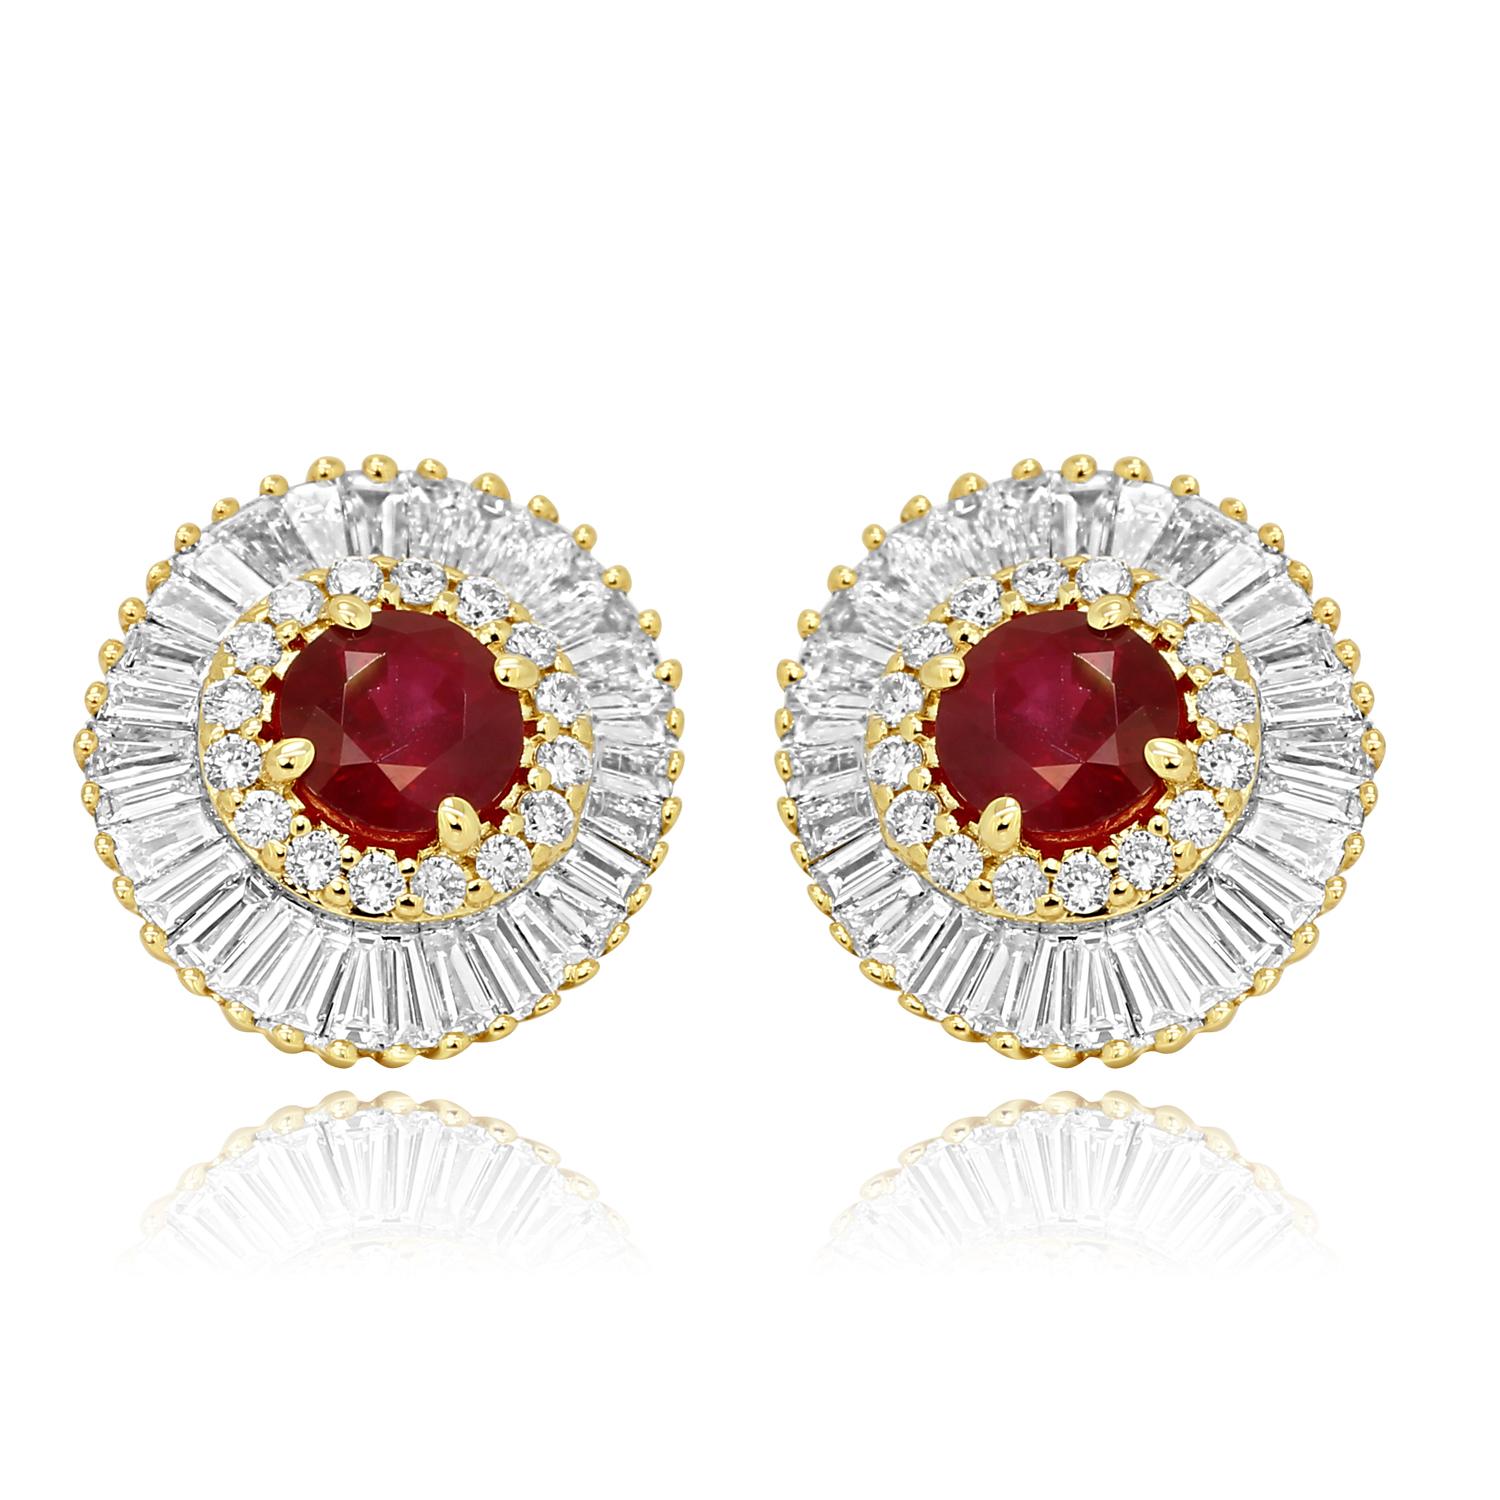 Gorgeous Ruby Round 1.06 Carat encircled in a Double Halo of White Round Diamonds 0.22 Carat and White Baguette Diamond 0.98 Carat in 14K Yellow Gold Stunning Ballerina Style Earring.

Style available in different price ranges. Prices are based on